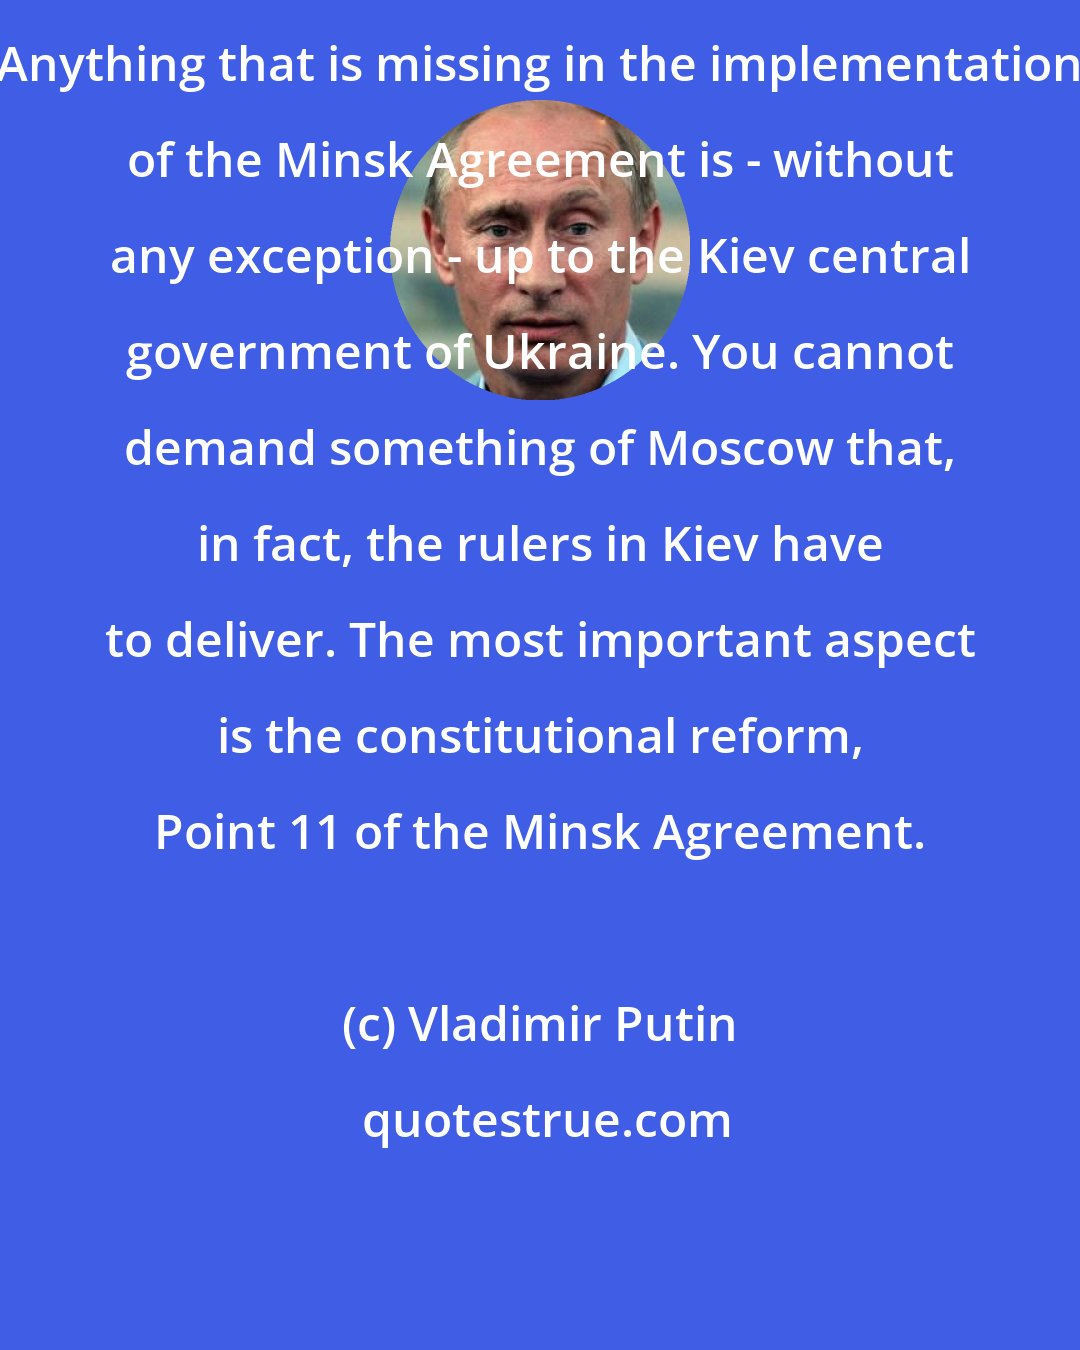 Vladimir Putin: Anything that is missing in the implementation of the Minsk Agreement is - without any exception - up to the Kiev central government of Ukraine. You cannot demand something of Moscow that, in fact, the rulers in Kiev have to deliver. The most important aspect is the constitutional reform, Point 11 of the Minsk Agreement.